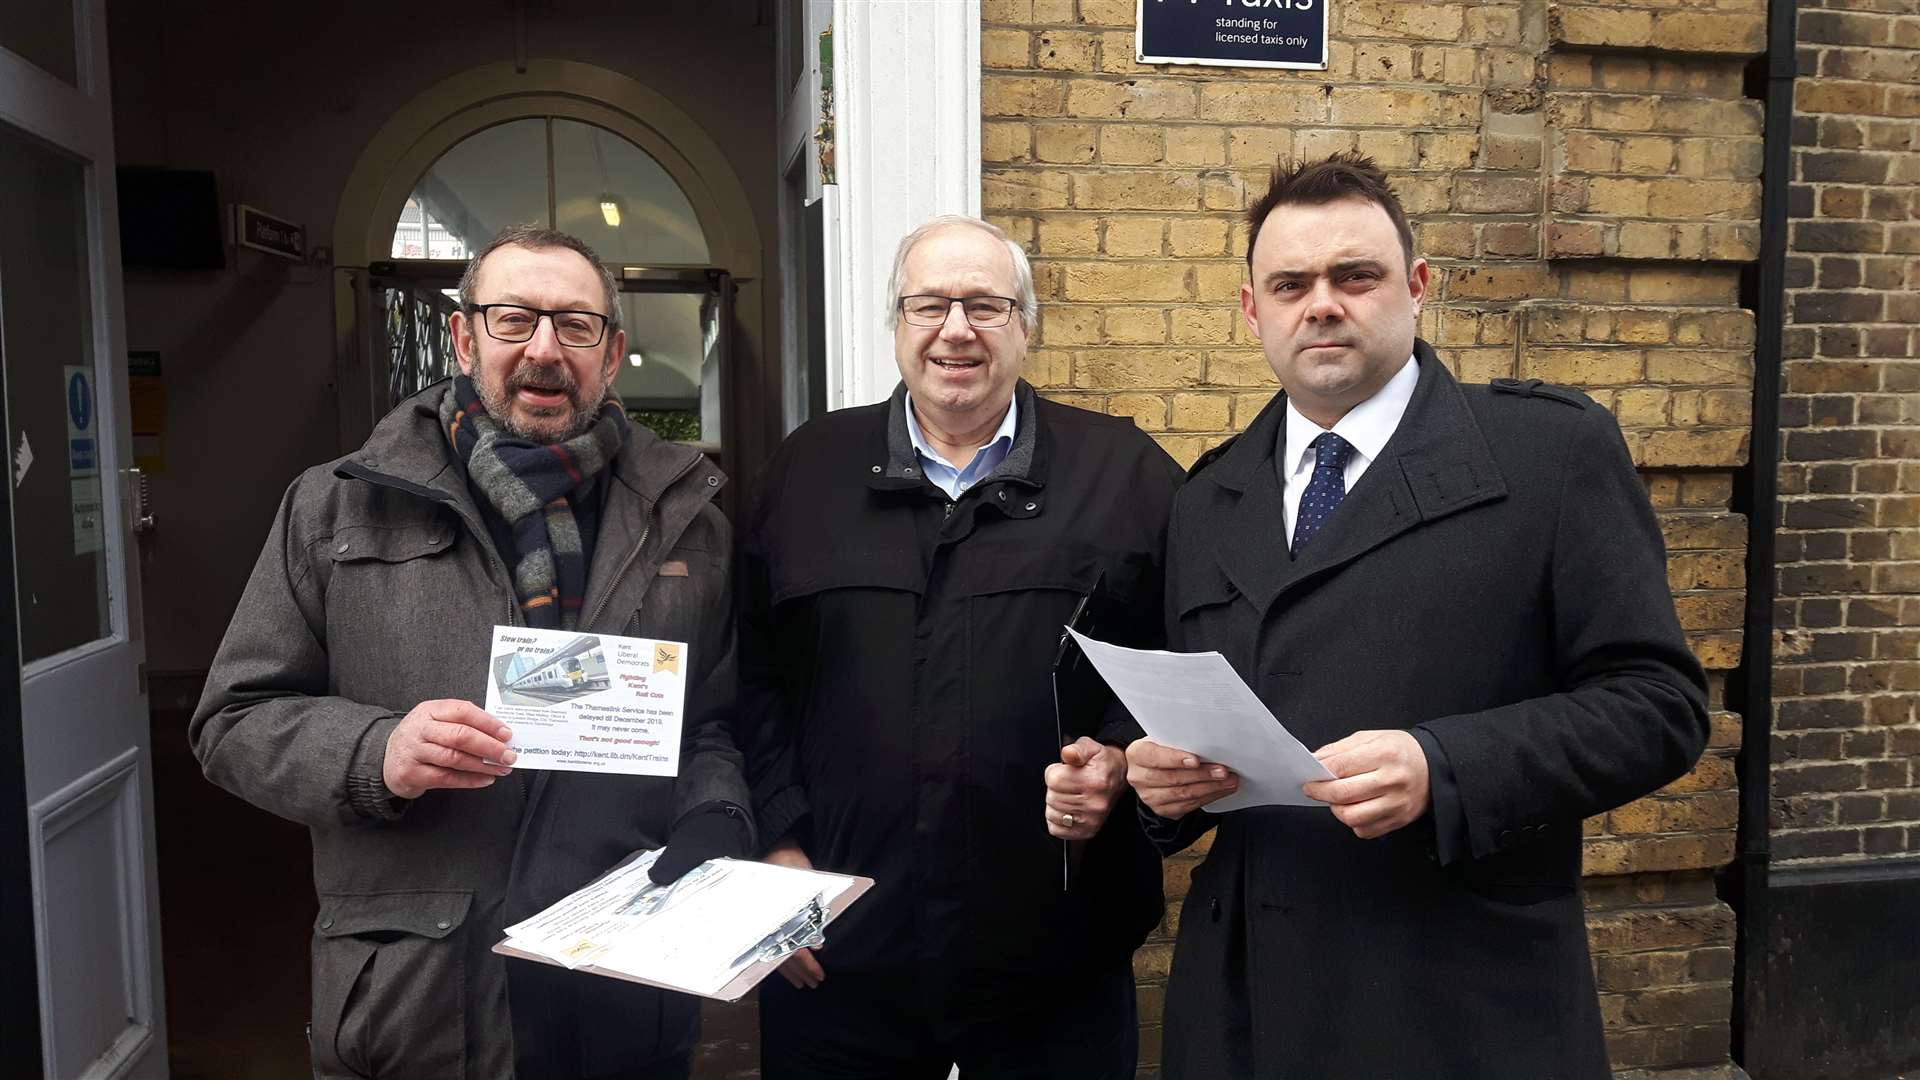 James Willis (right) campaigning for better rail services outside Maidstone West station in March this year, with Lib Dem KCC councillors Rob Bird (left) and Ian Chittenden